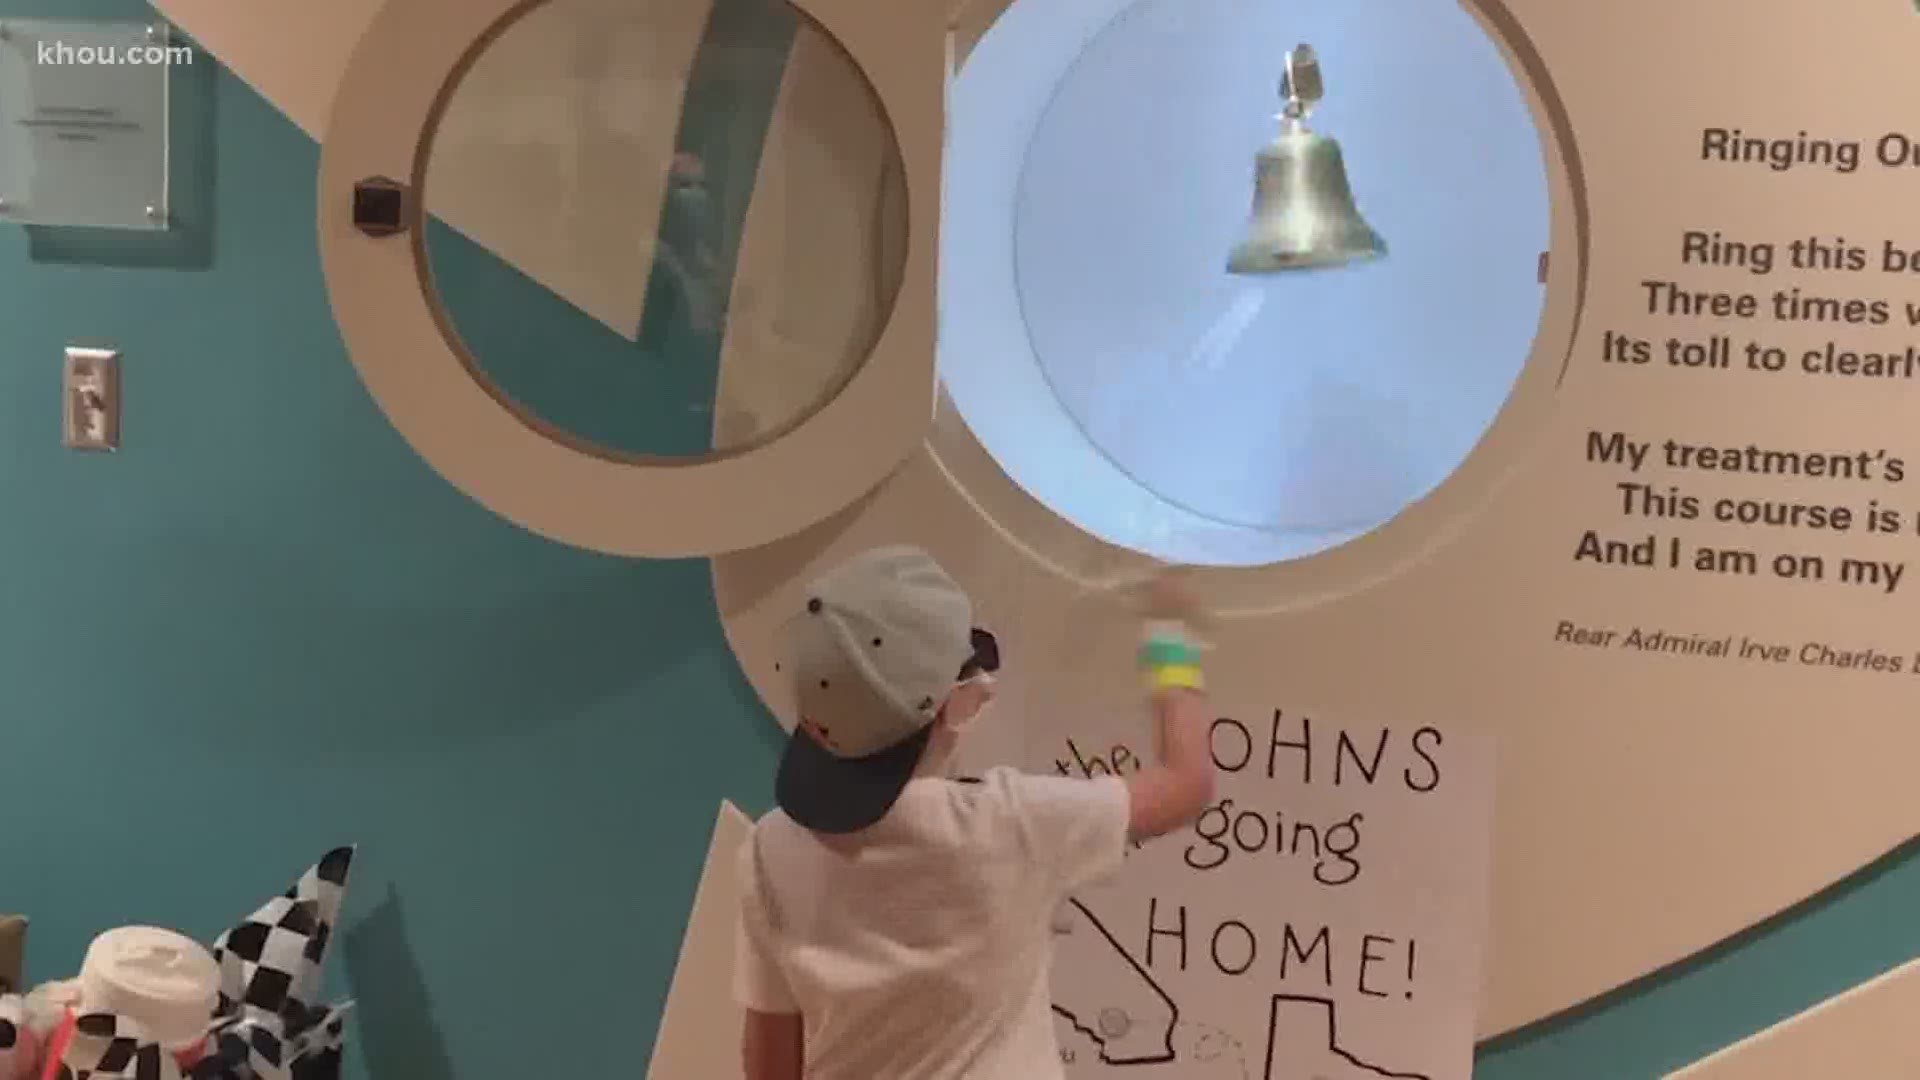 A 5-year-old boy had the biggest day of his life Friday. He rang the bell at MD Anderson, signaling the end of his cancer treatment.